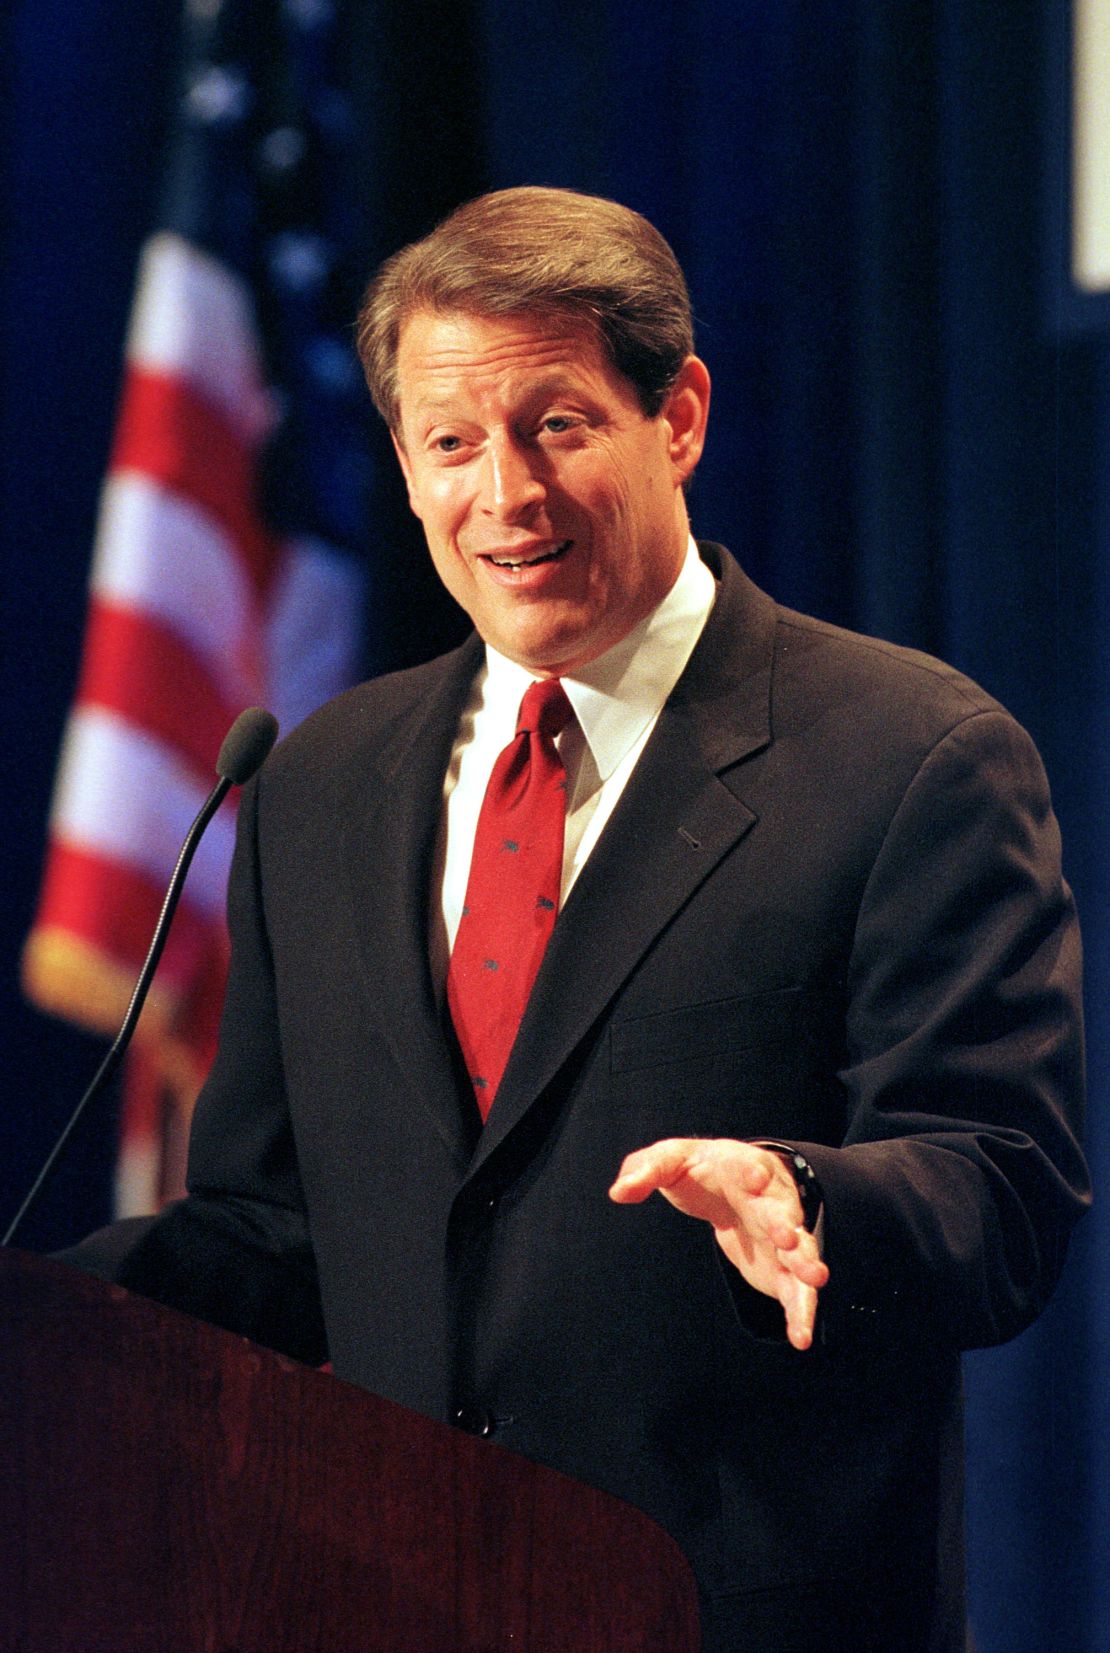 Katz had great fun with Al Gore's stiff public image, and Gore used the lines to mock himself.